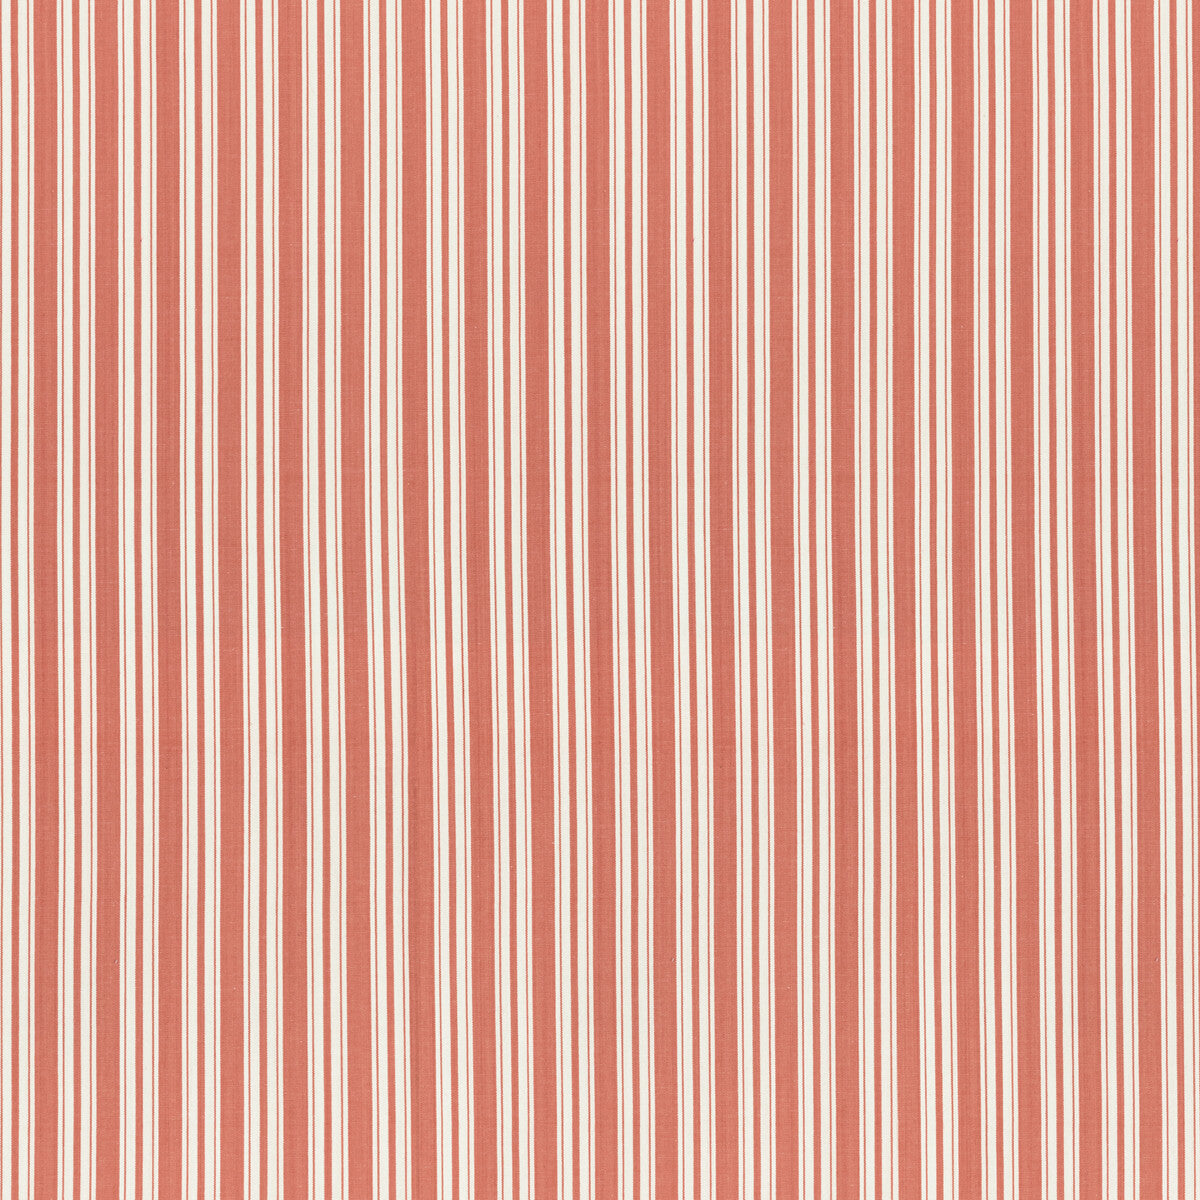 Selune Stripe fabric in melon color - pattern 8022118.12.0 - by Brunschwig &amp; Fils in the Normant Checks And Stripes II collection